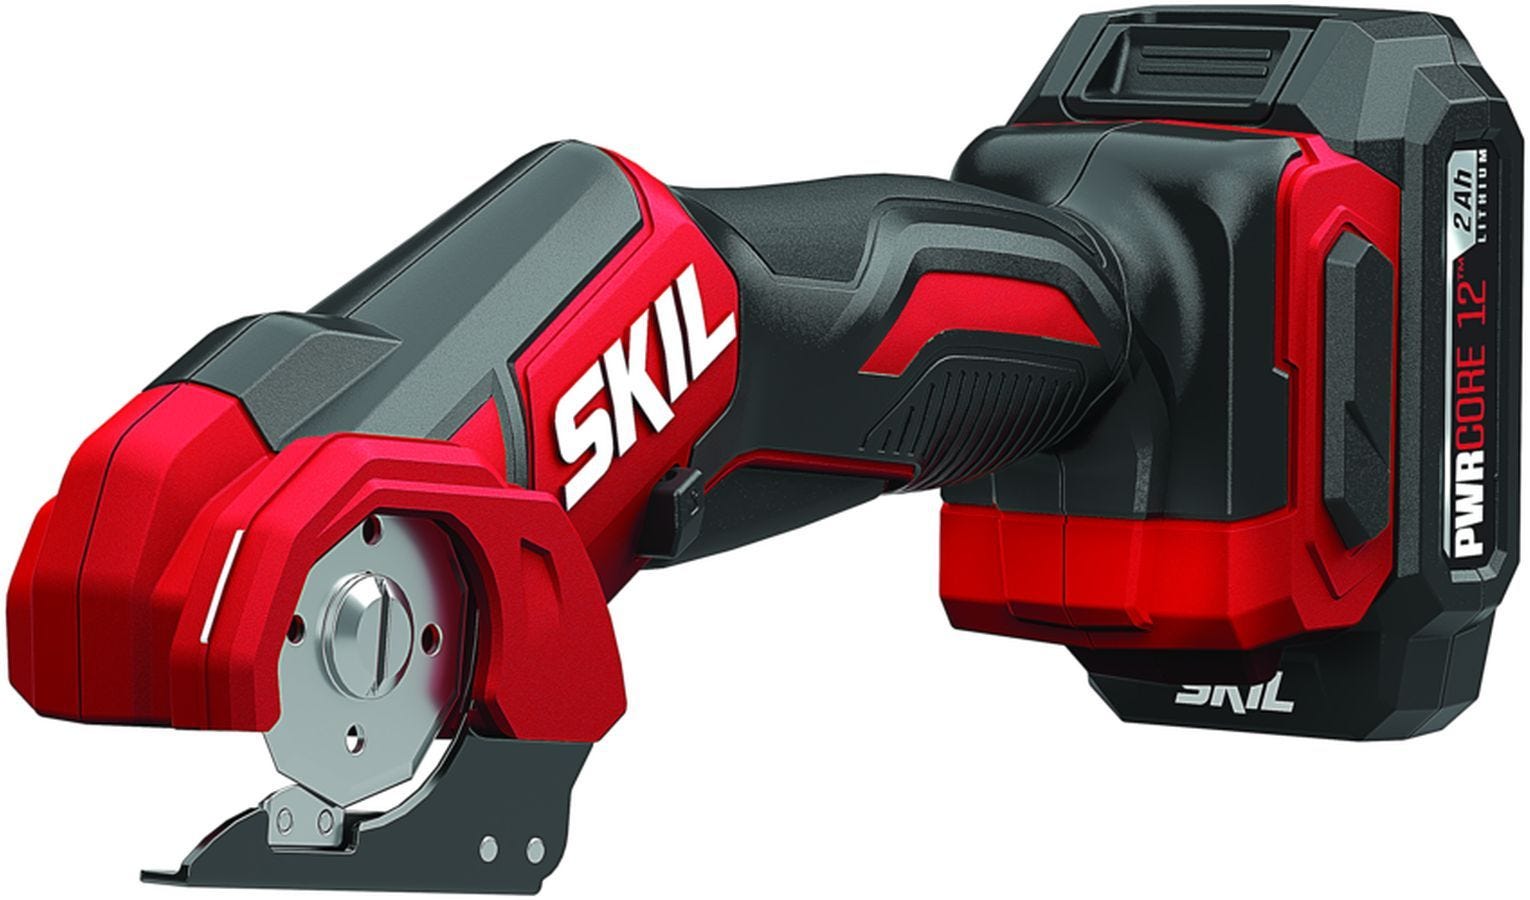 SKIL ES4651A-00 PWR CORE 12 12V Multi-Cutter, Tool Only